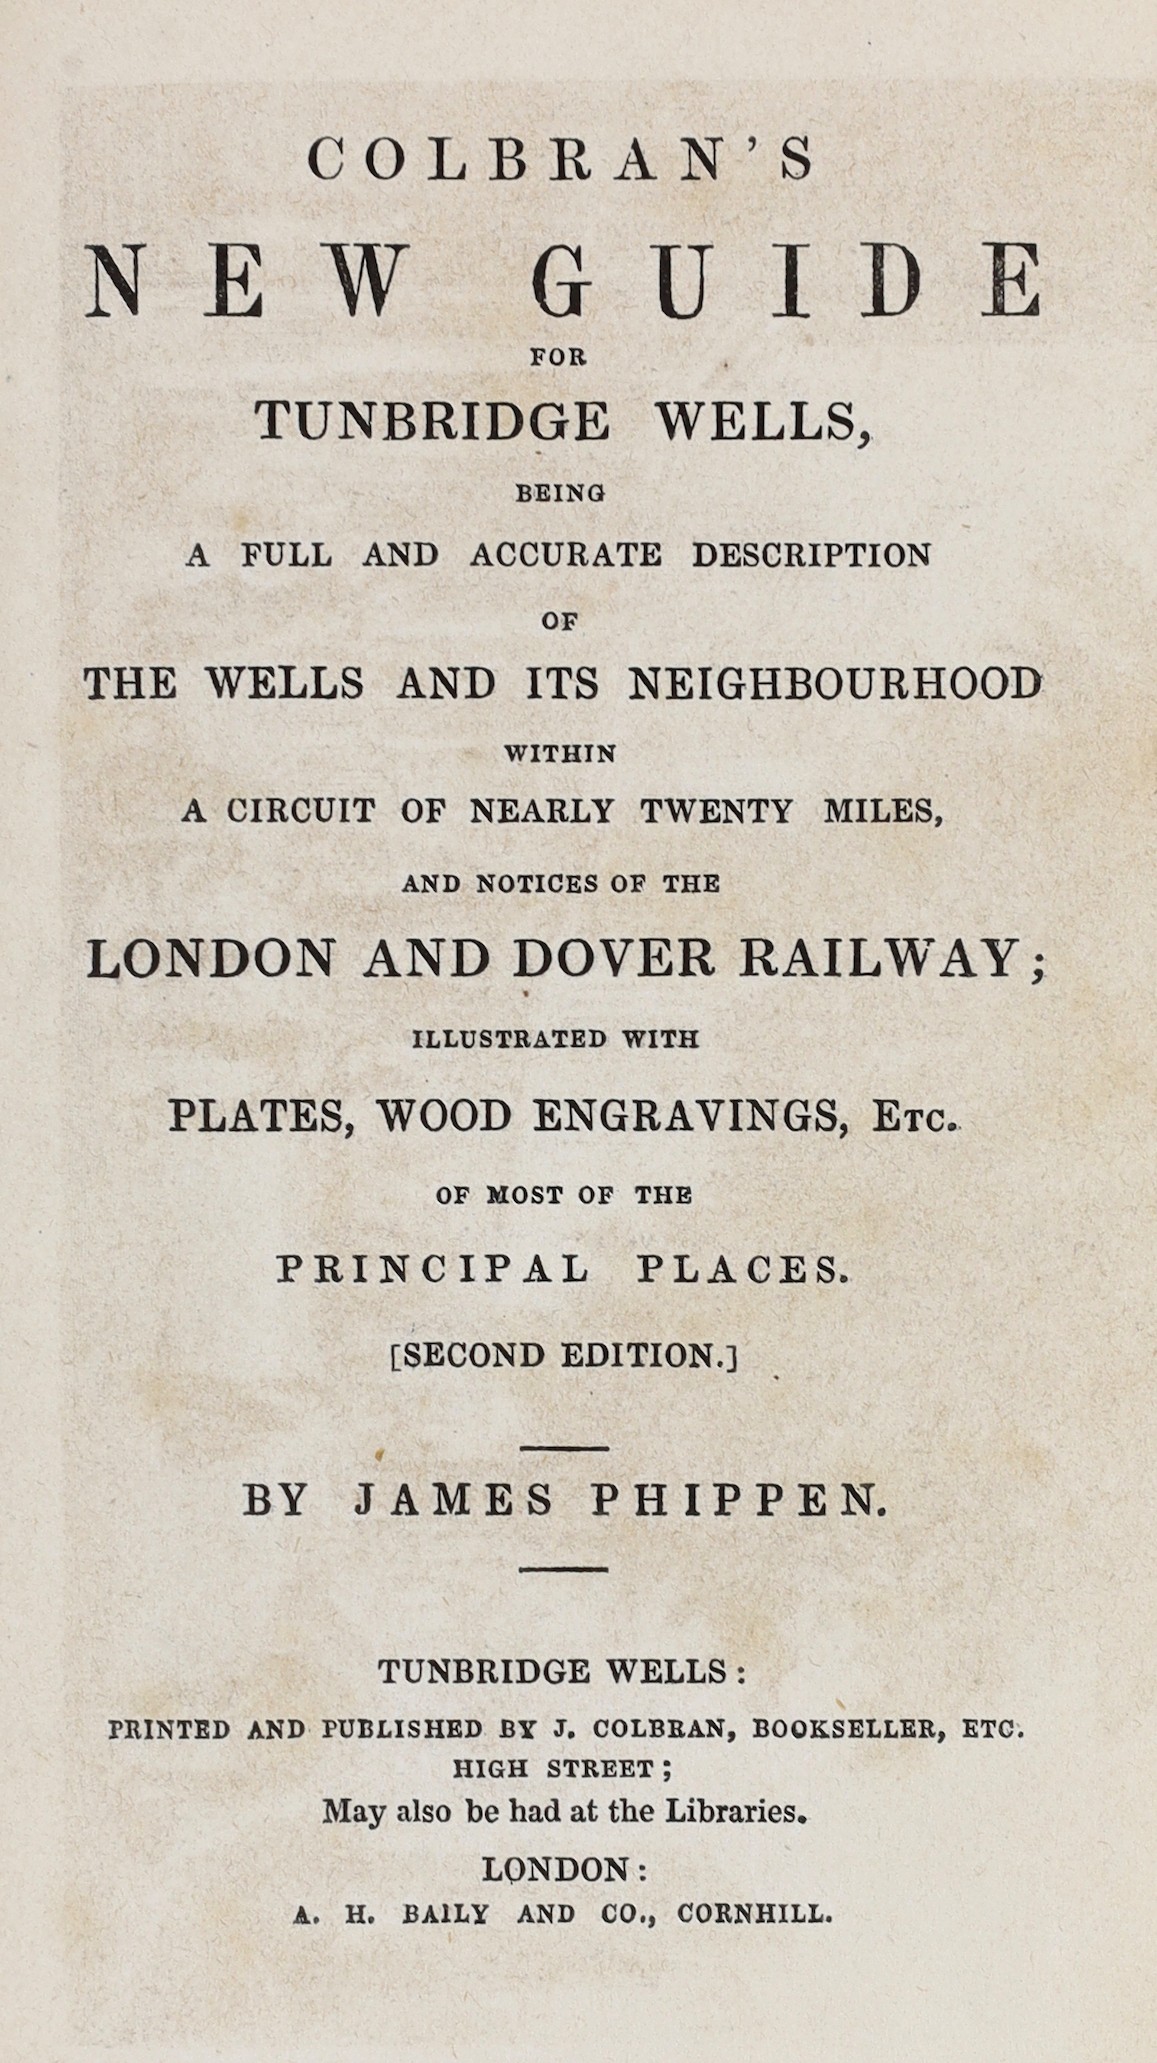 KENT, TUNBRIDGE WELLS: Colbran's New Guide for Tunbridge Wells...and Notices of the London and Dover Railway.... 2nd edition. By James Phippen. folded hand-coloured plan, 10 plates, text engravings and advertiser; origin